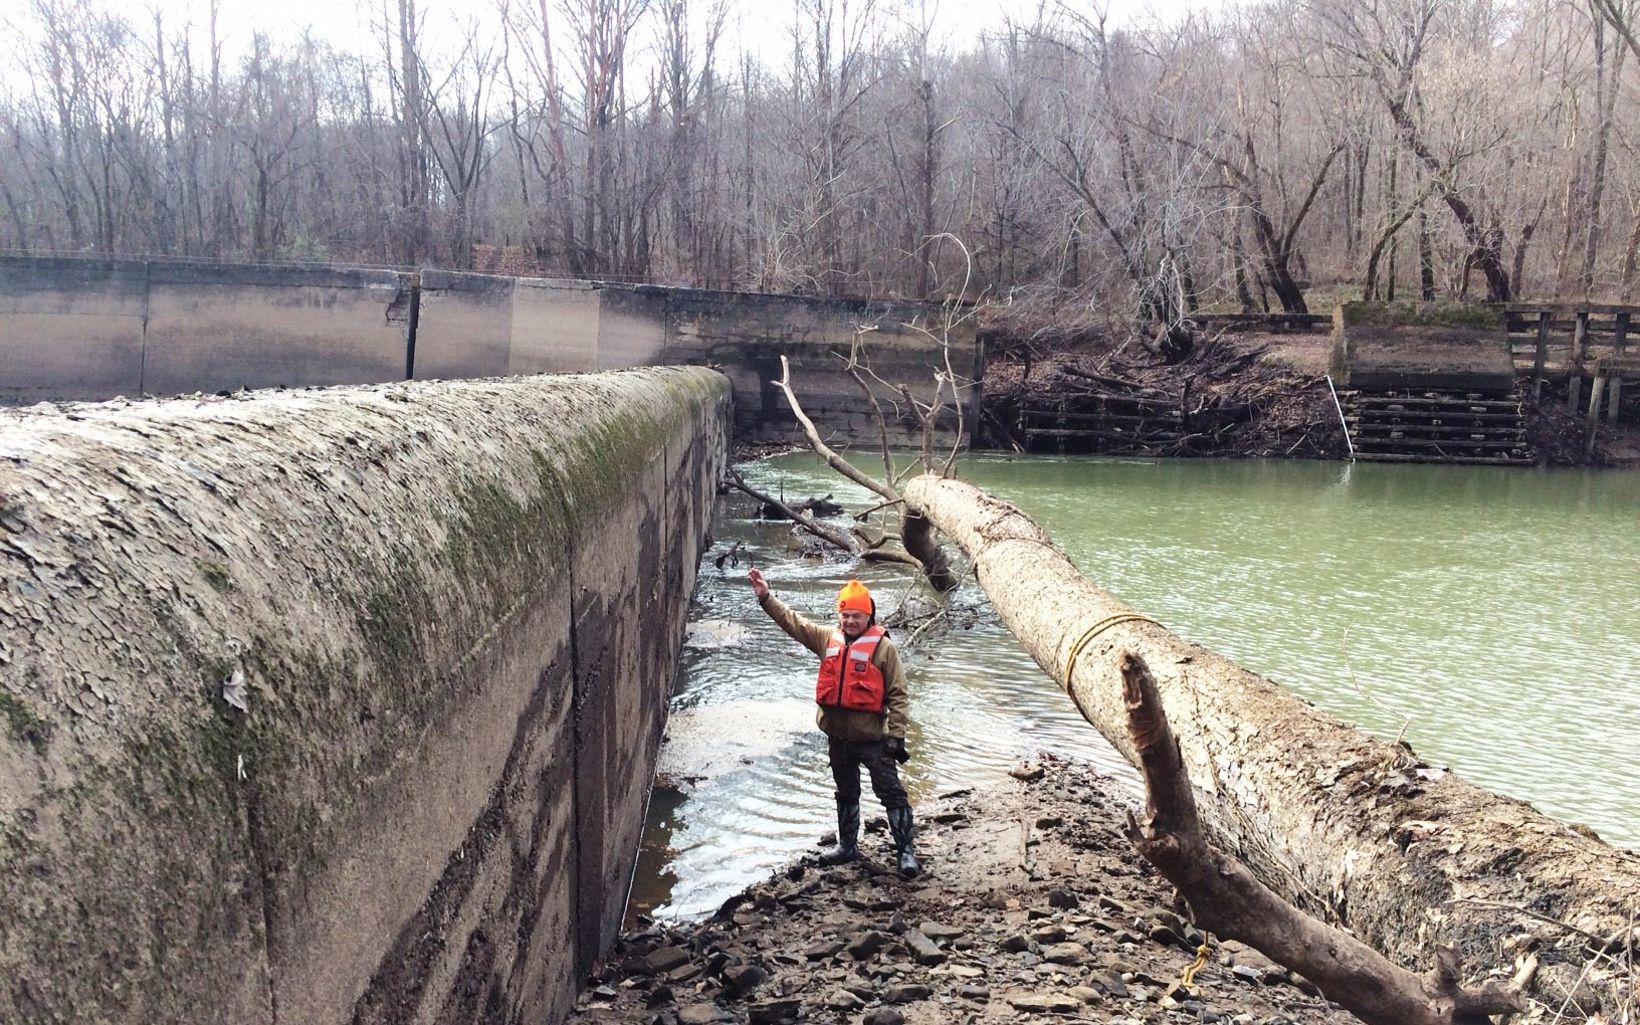 Dam Check Up   A breach occurred on Nov. 25 2016, causing water levels to drop seven feet behind the dam. Here, a U.S. Army Corps of Engineers biologist stands next to the dam after the breach. © U.S. Army Corps of Engineers